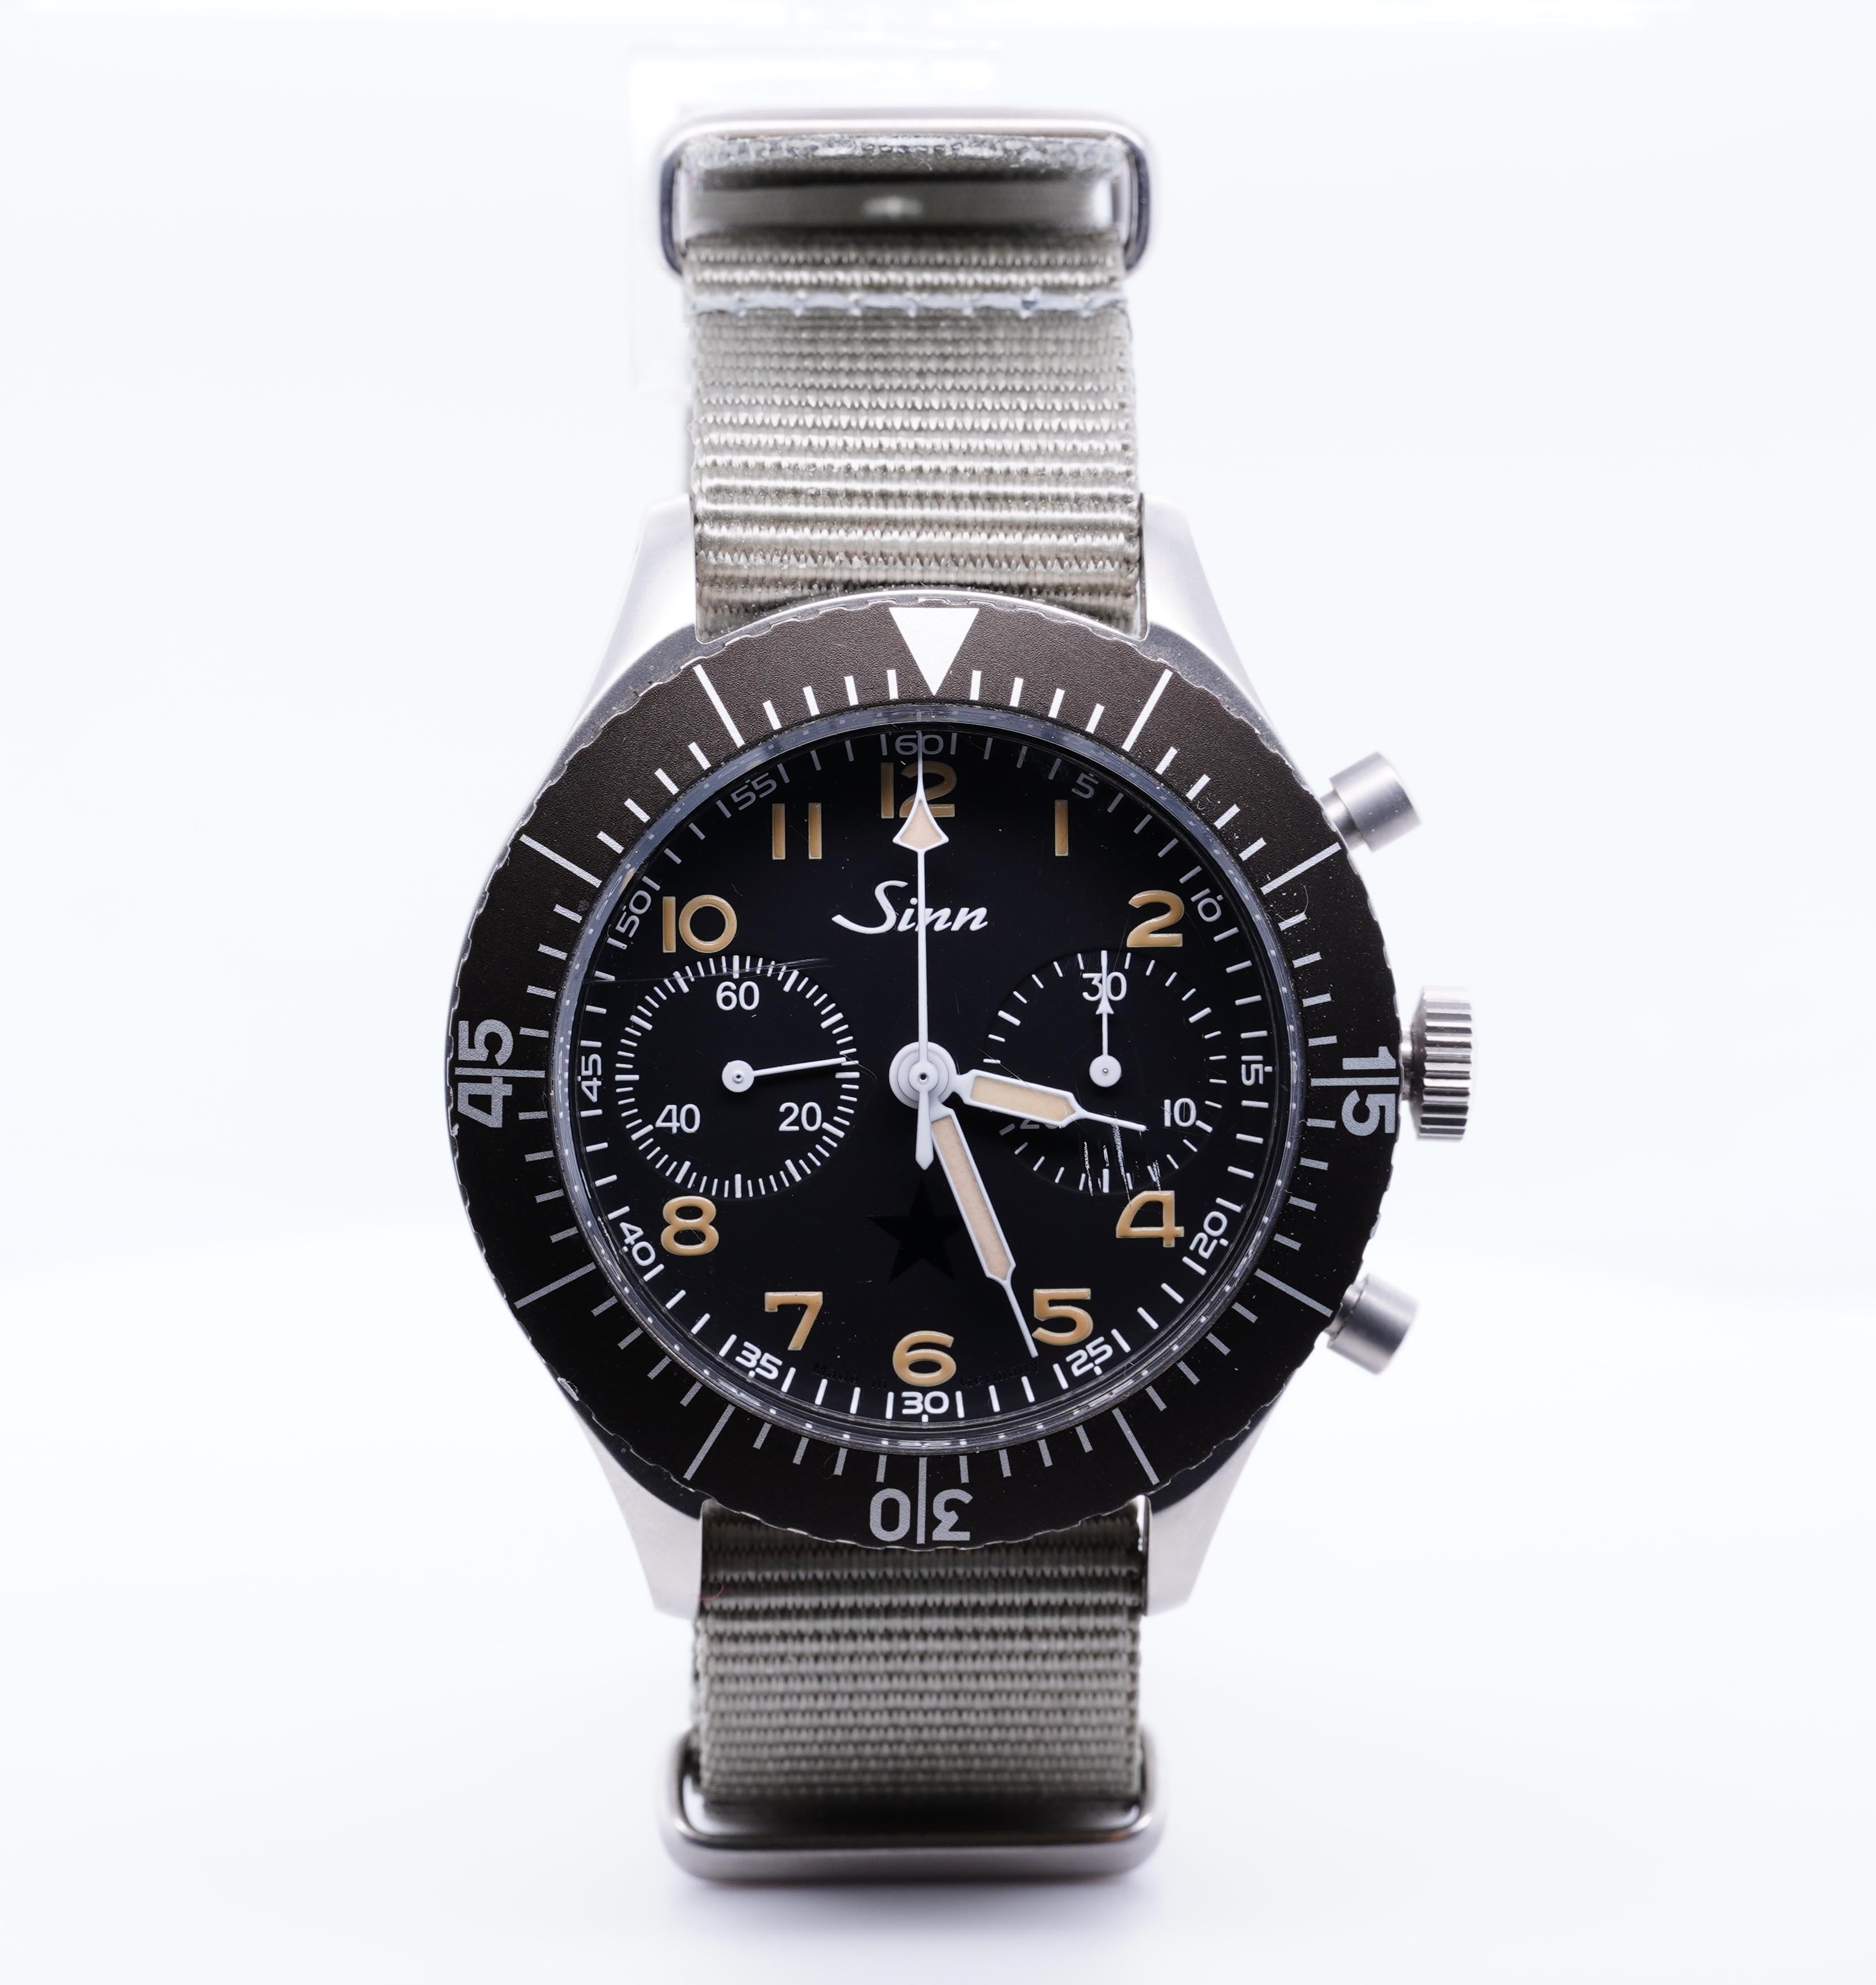 Sinn Stell Limited Edition 155 Revolution Chronograph Wristwatch, Ref. 155.031

Brand	Sinn
Reference number	155.031
Movement	Automatic
Case material	Steel
Year of production	2019
Condition	Pre-owned
Original box, original